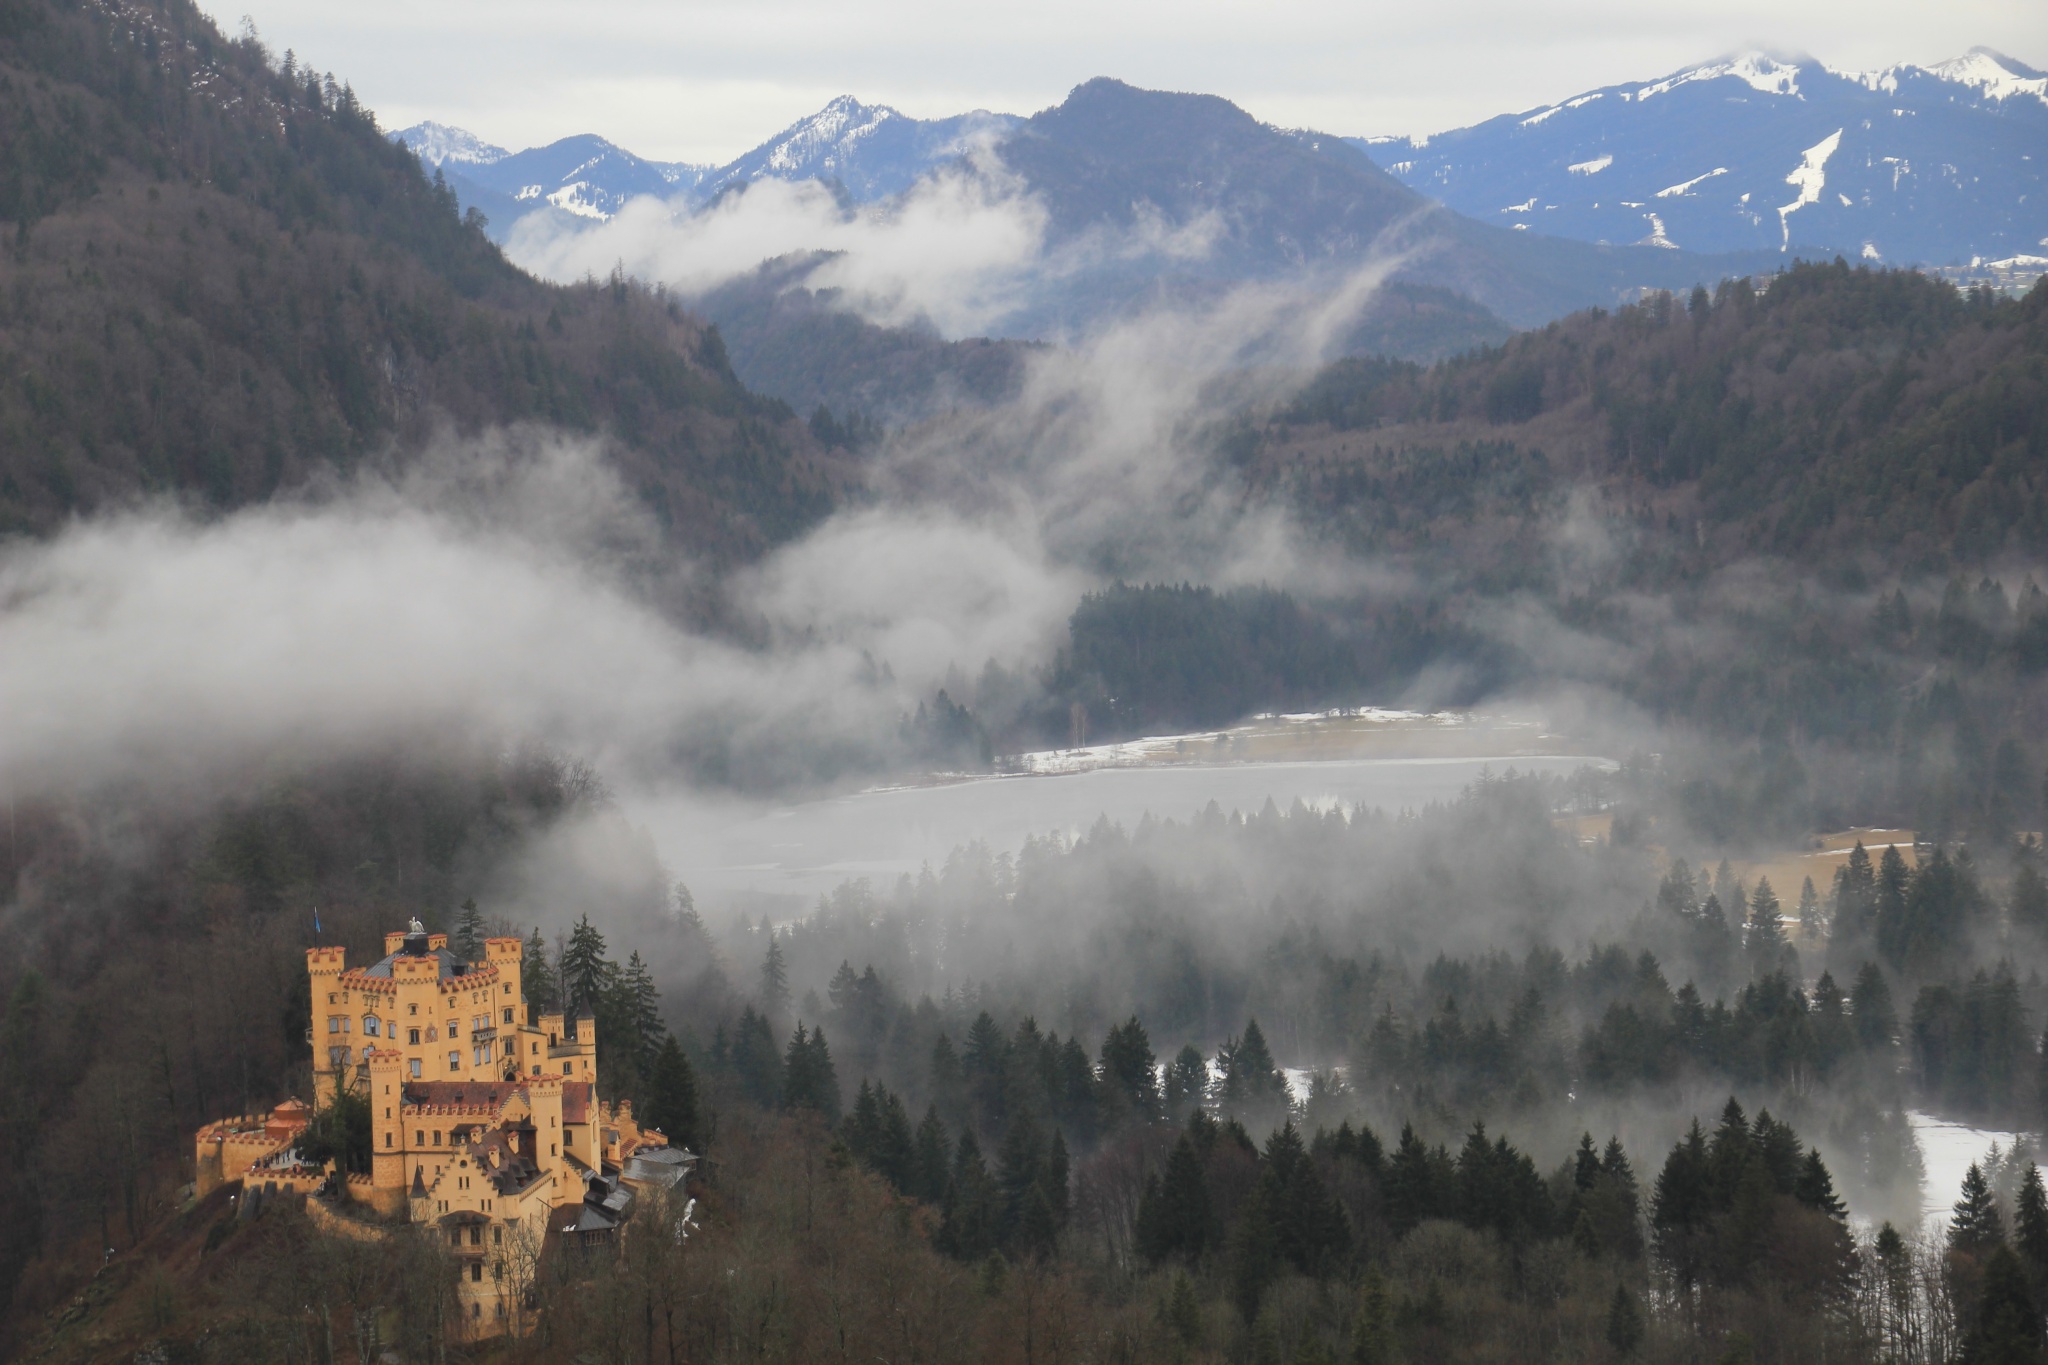 Ludwig II lived in Hohenschwangau Castle before eventually moving to fairtytale Neuschwanstein.